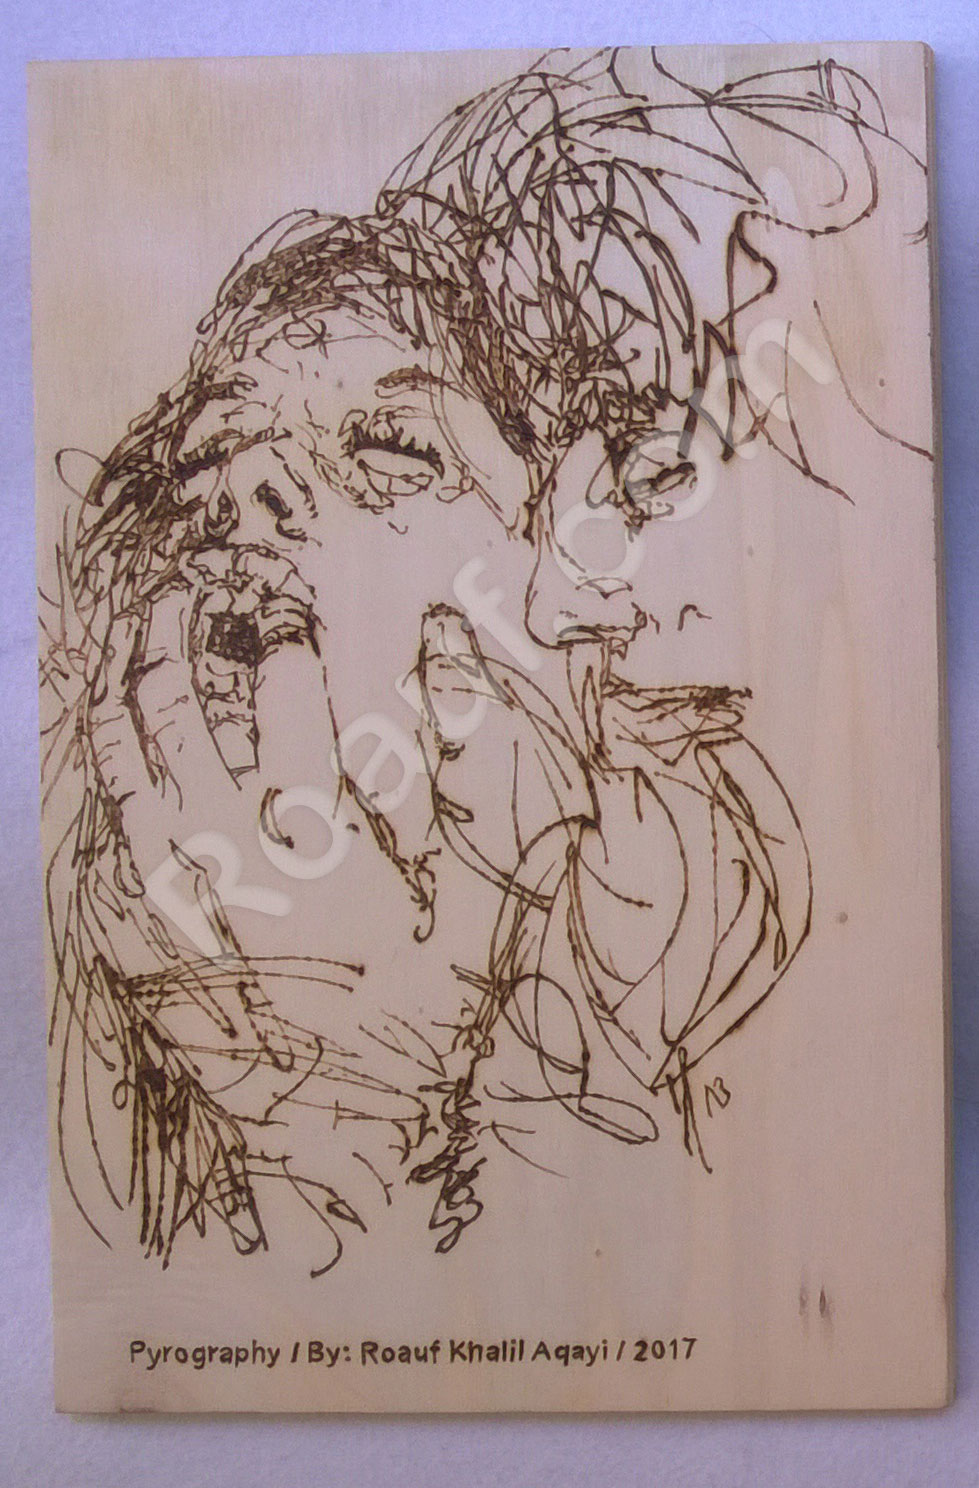 Pyrography Panel of Love Making